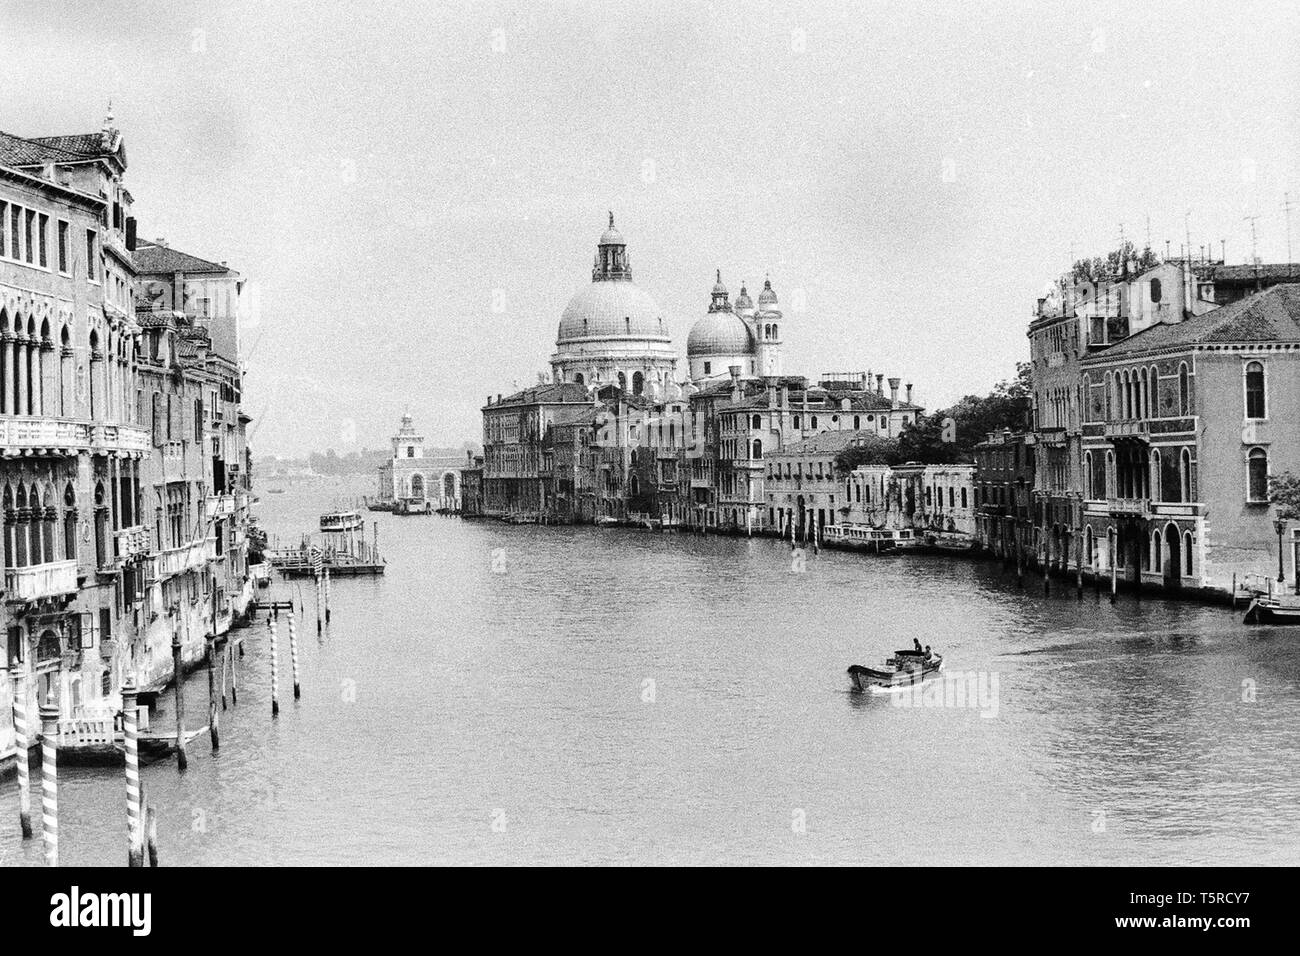 Venice, Italy, 1980 - black and white photo - Overview of the Grand Canal from the Accademia bridge, with the Basilica of Santa Maria della Salute in the background Stock Photo